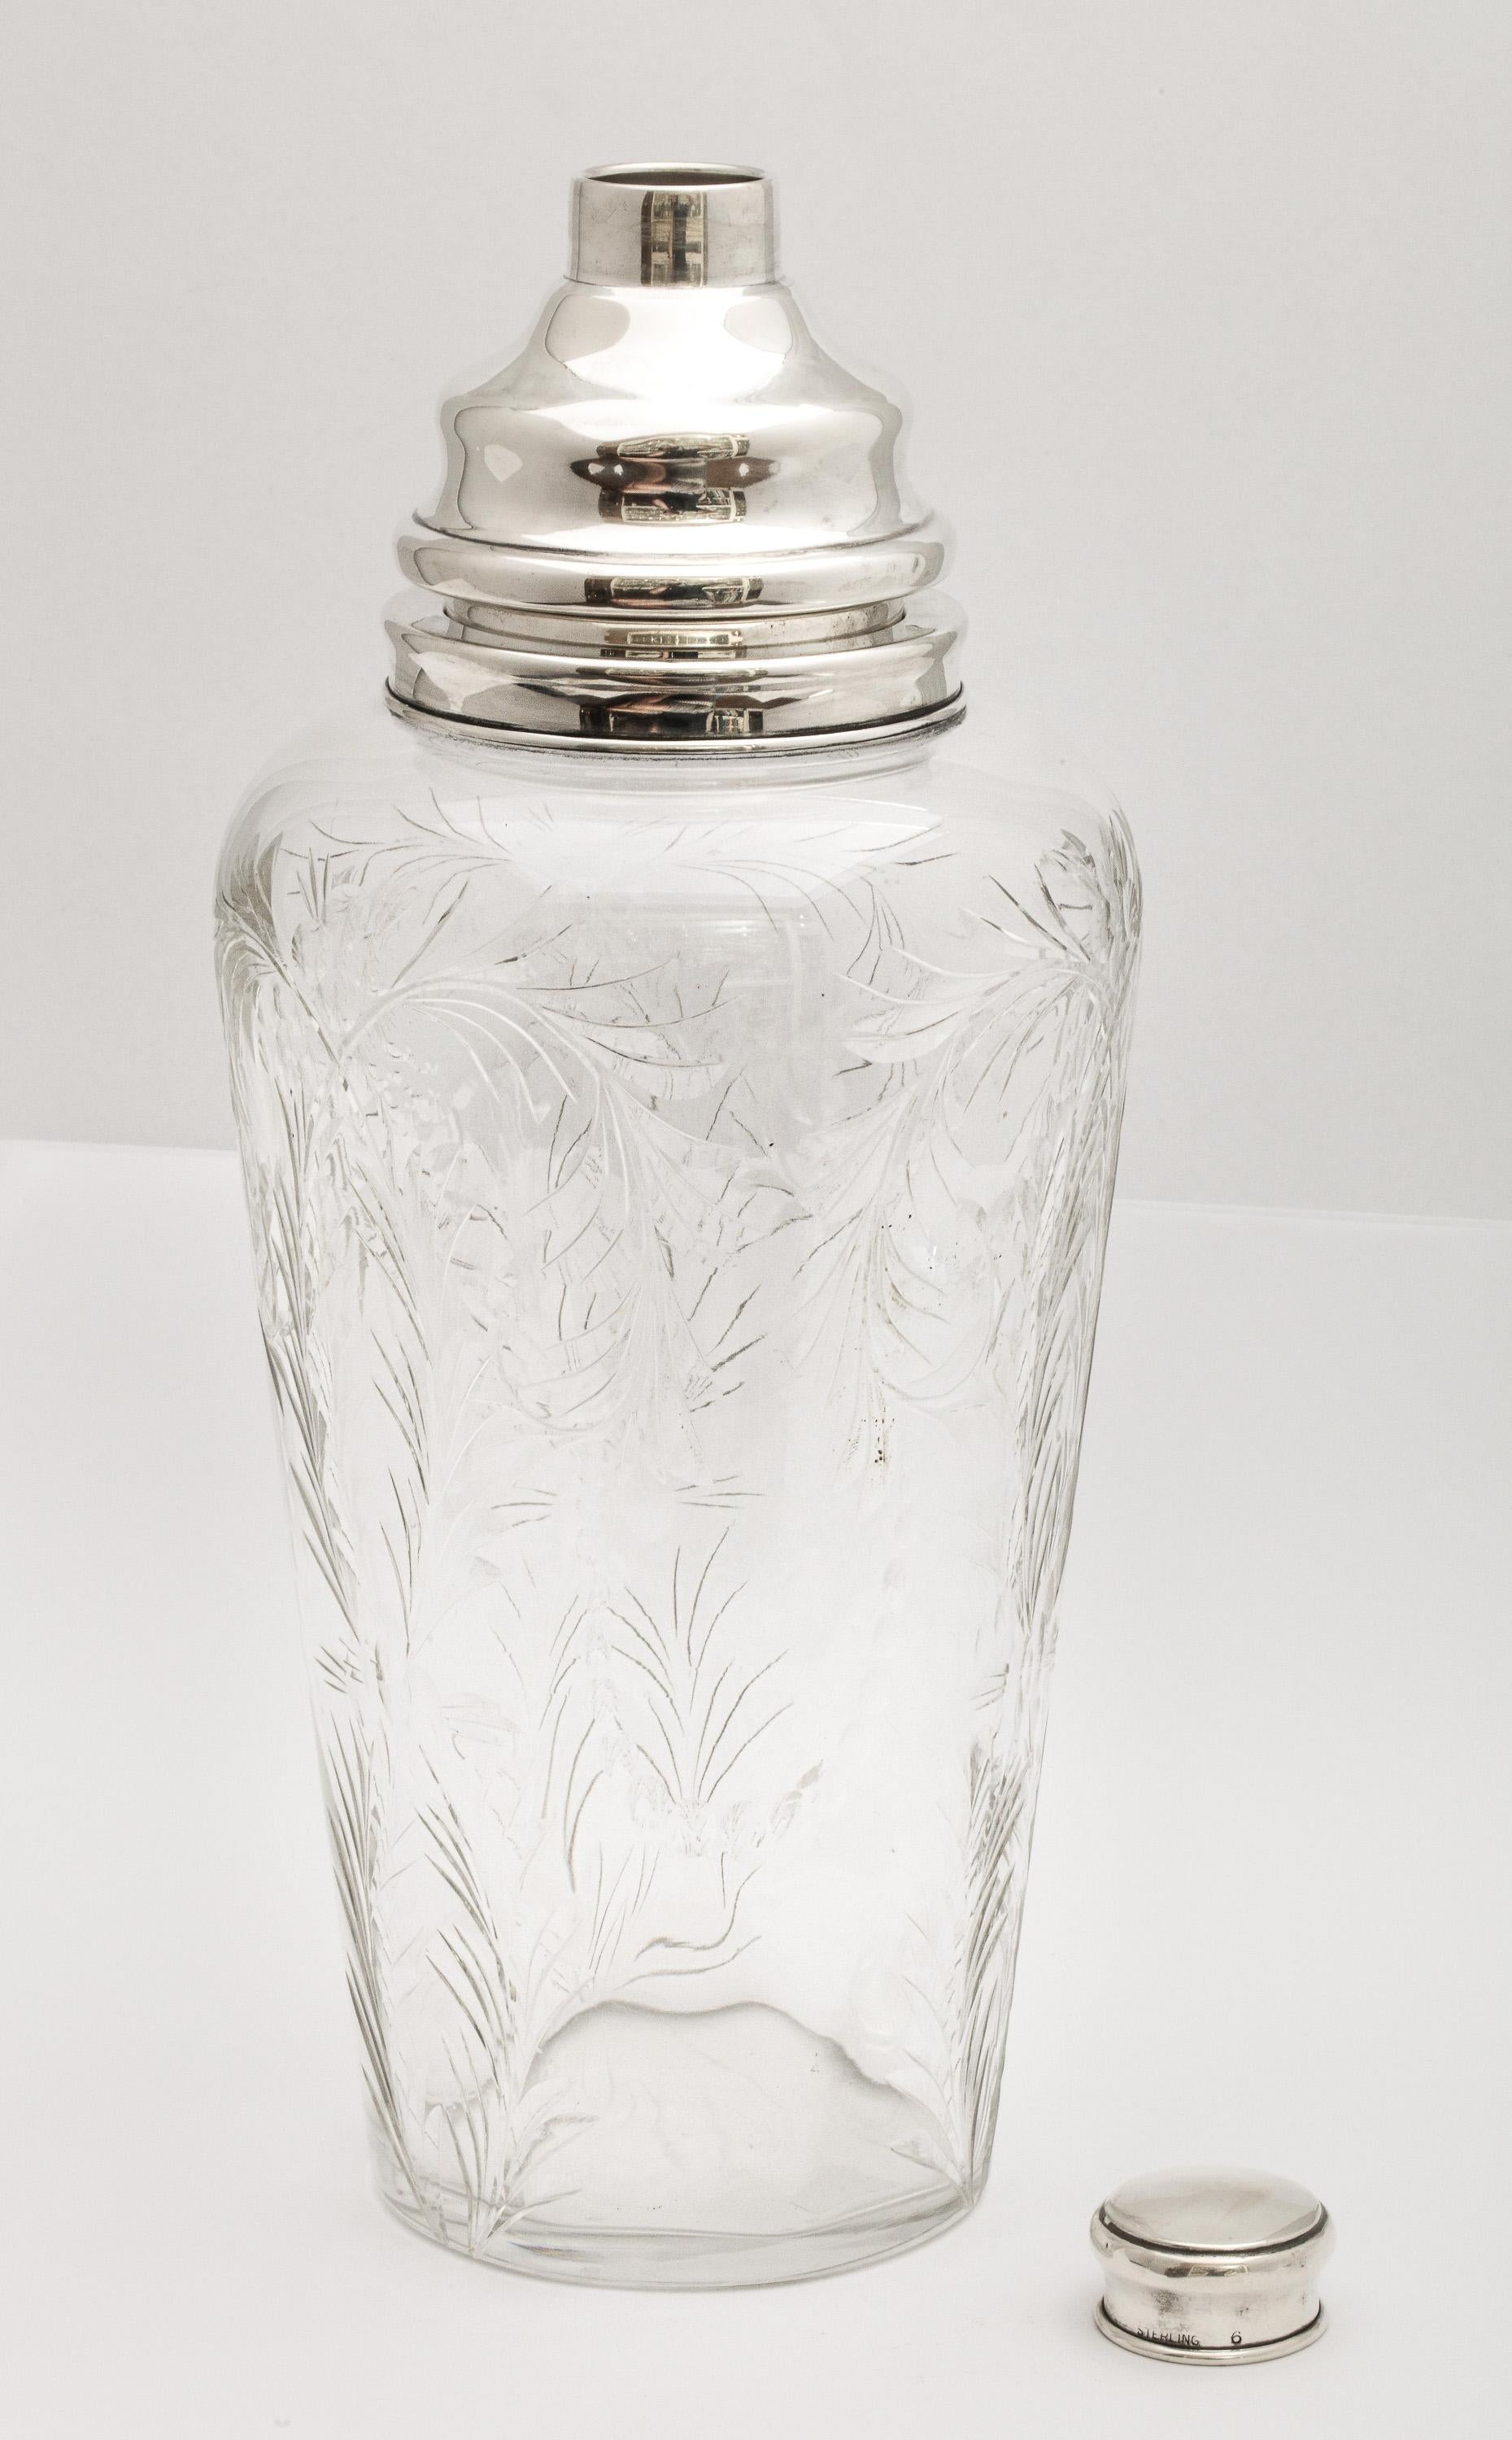 Art Deco Sterling Silver-Mounted Cocktail Shaker by Hawkes 3